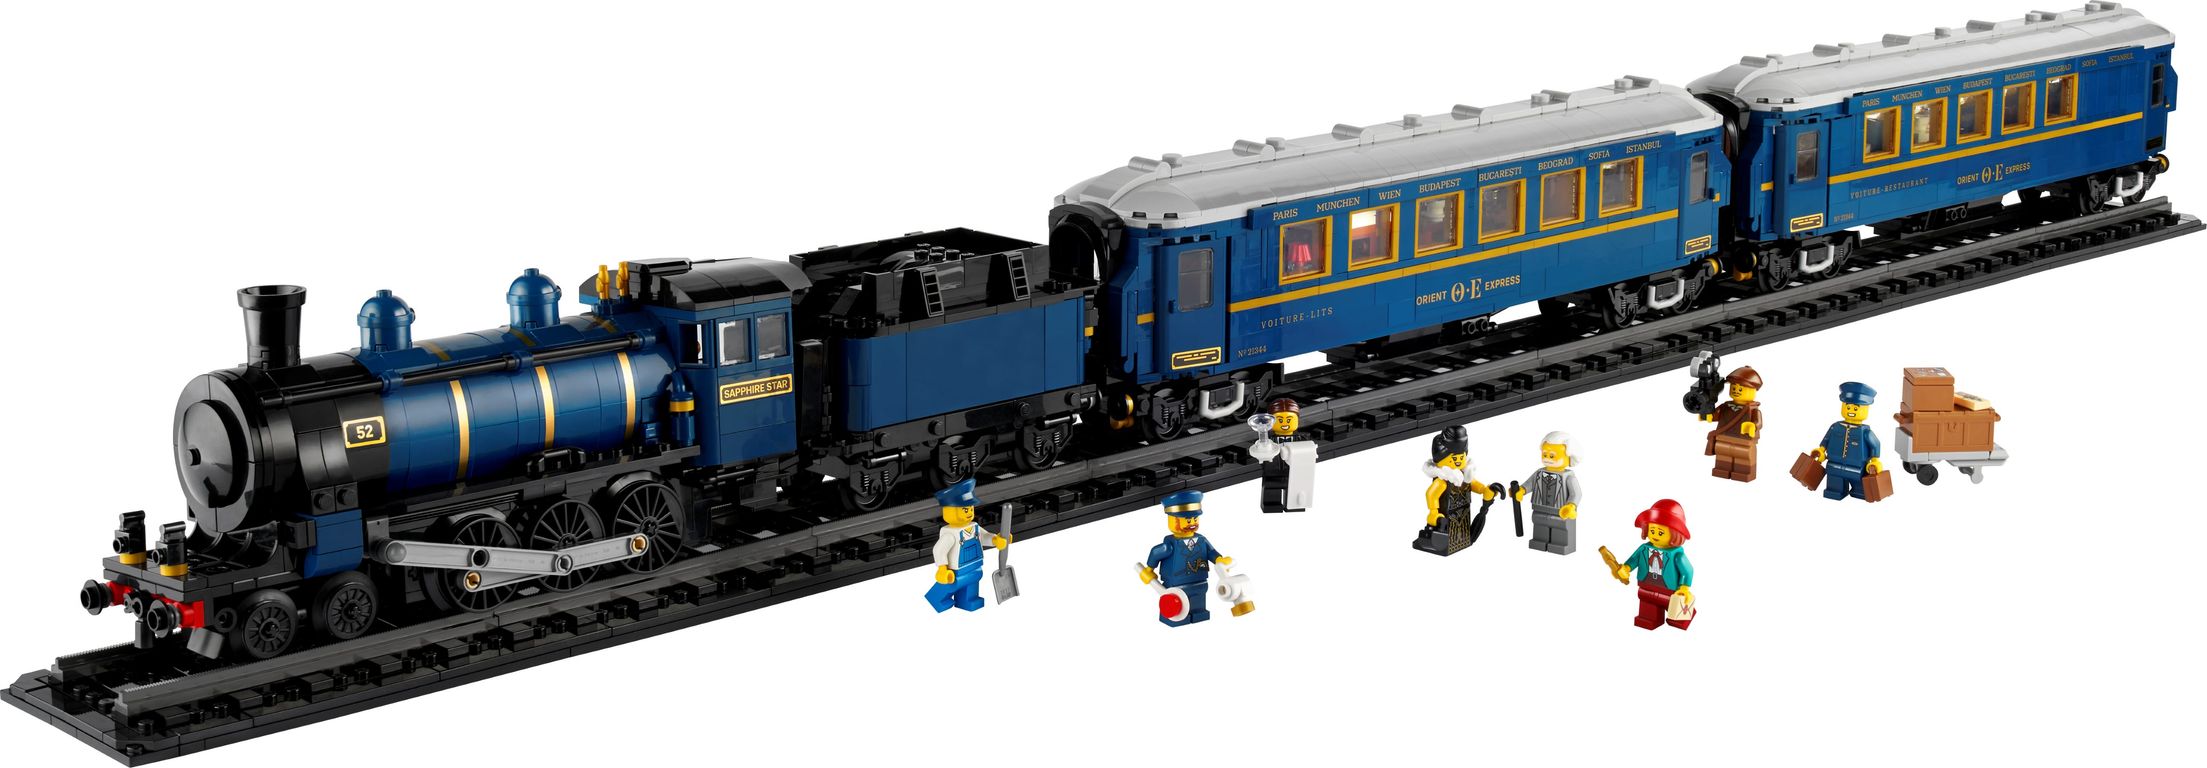 LEGO® Ideas The Orient Express Train components